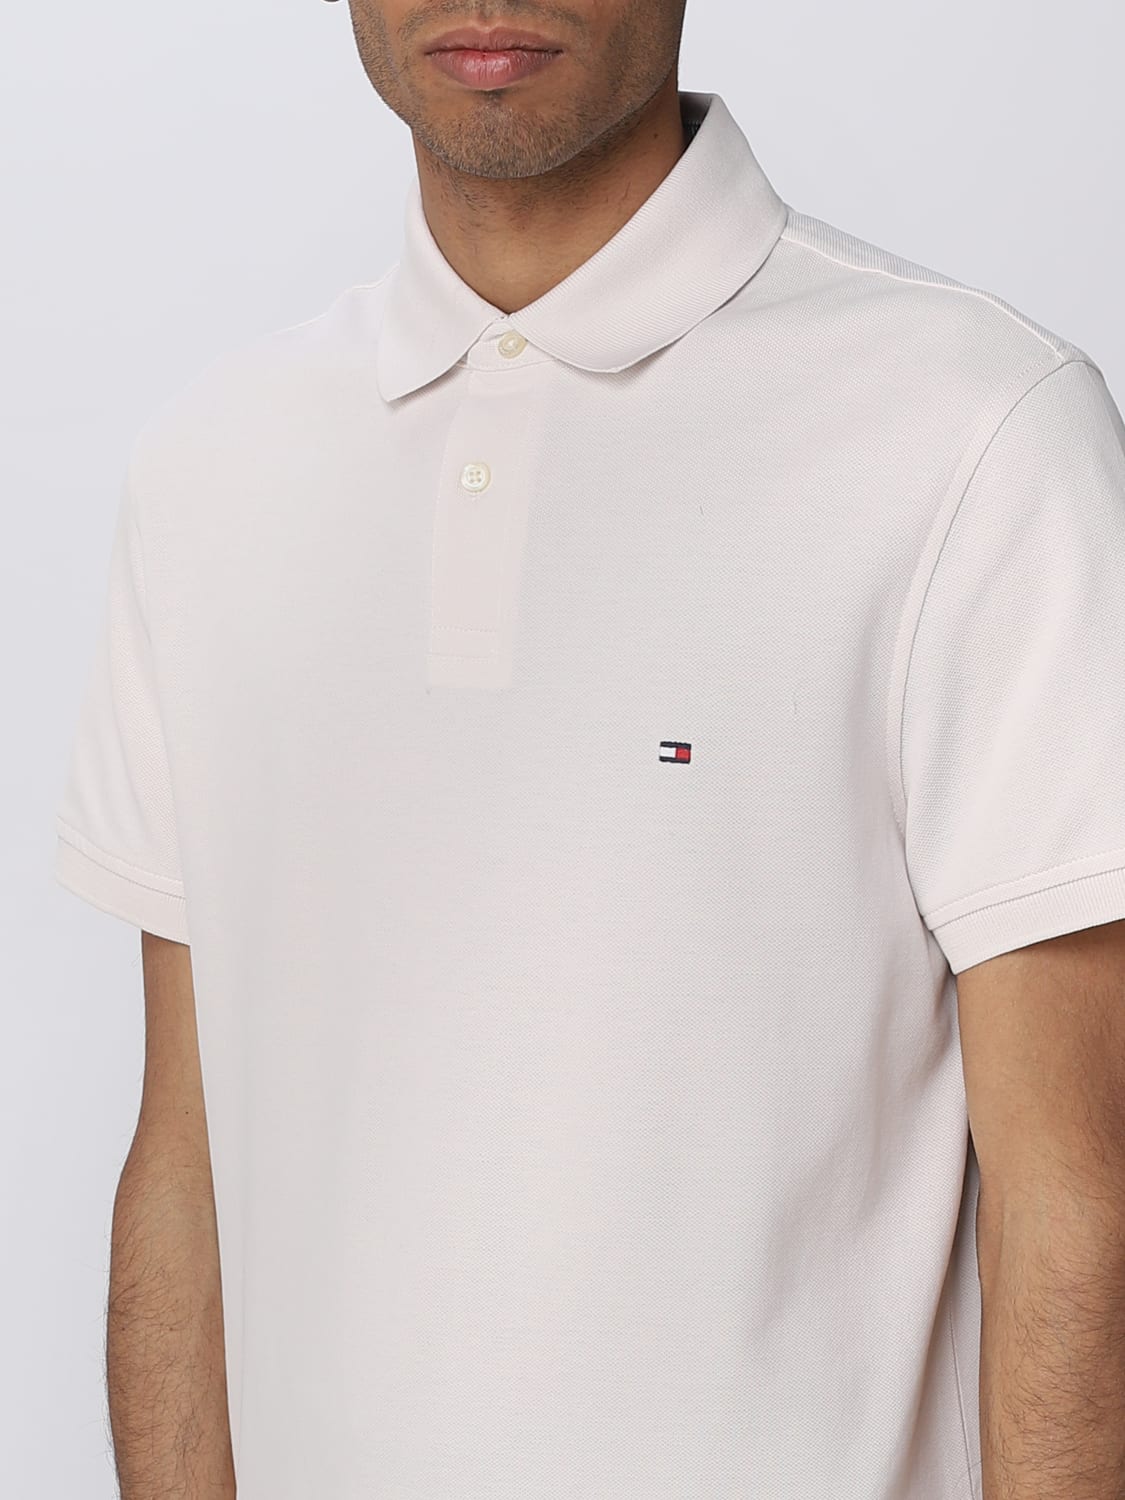 Tommy Outlet: polo shirt for White | Tommy Hilfiger polo shirt MW0MW17770 online at GIGLIO.COM